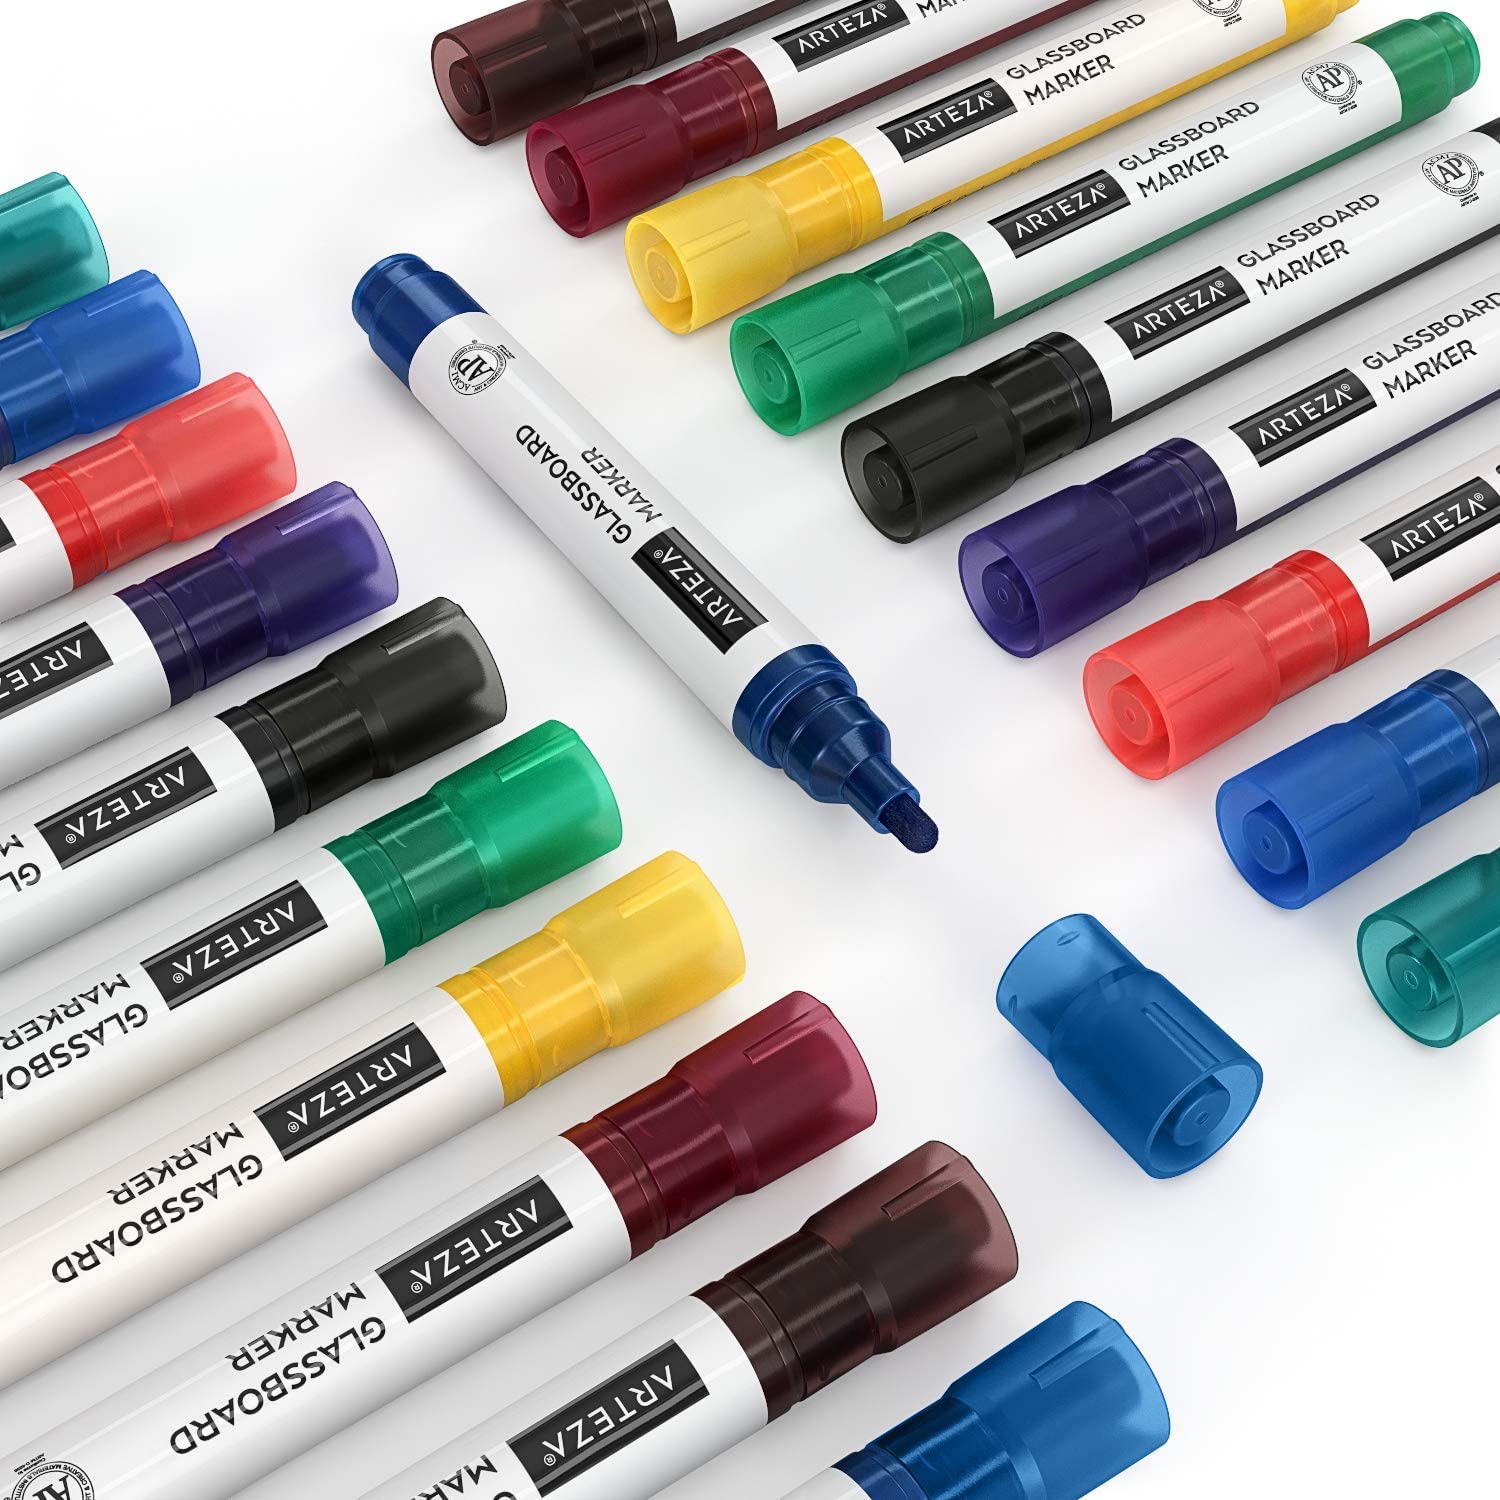 Assorted Artline Glassboard Marker, Number of Items/Pack: 1, Size: 2MM at  Rs 120 in Mumbai